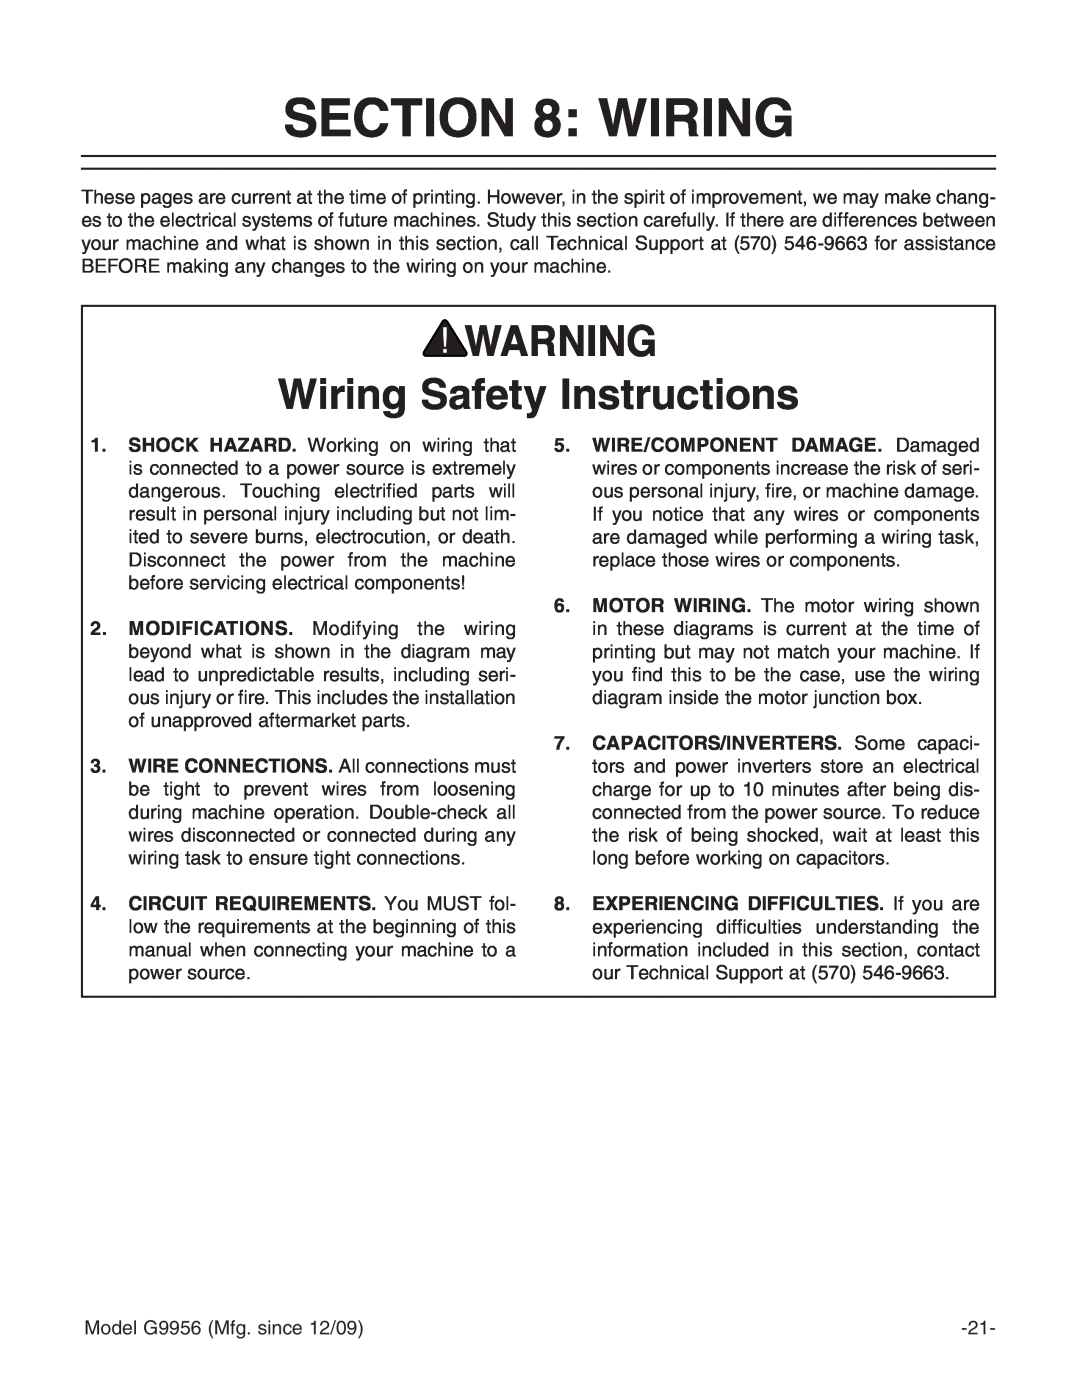 Grizzly G9956 instruction manual Wiring Safety Instructions 